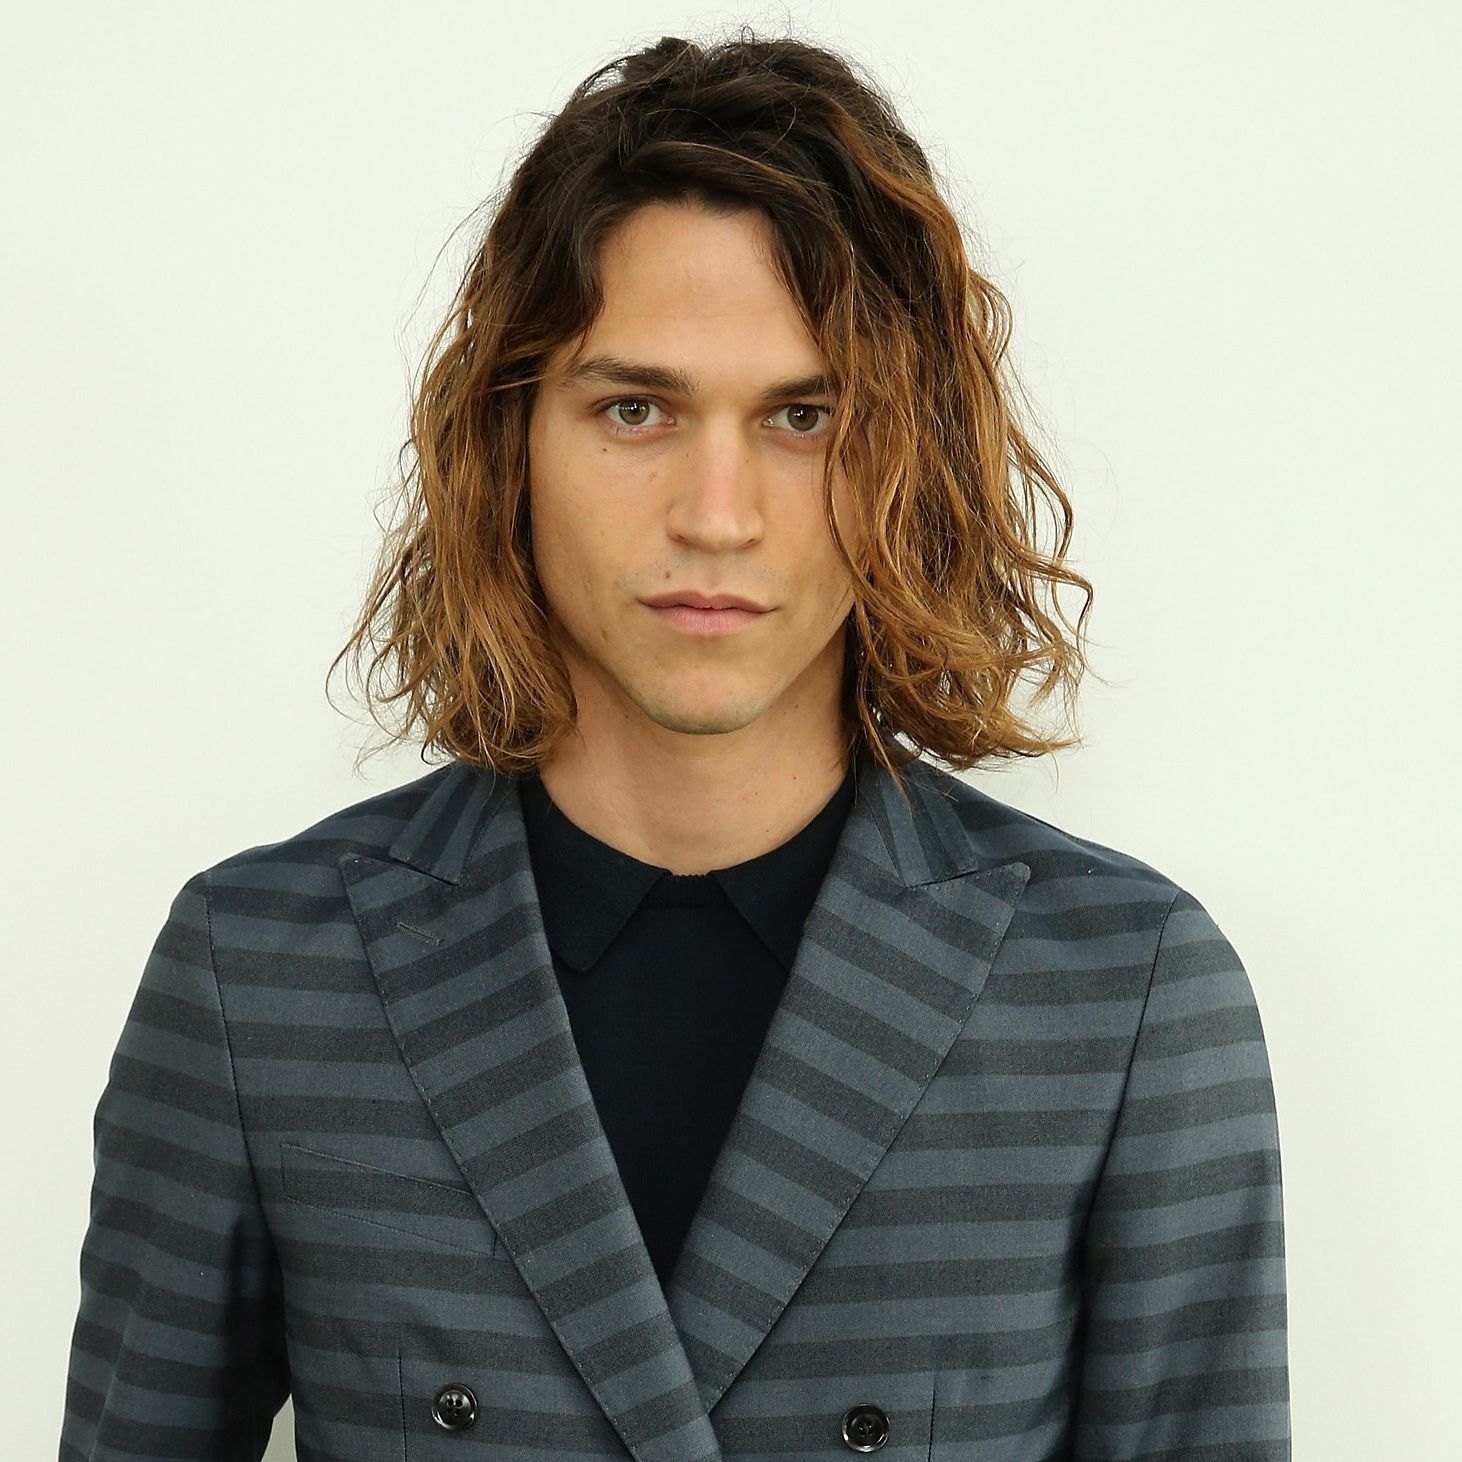 Gq Inside Trendy Layered With A Flip For Long Hairstyles (View 19 of 20)